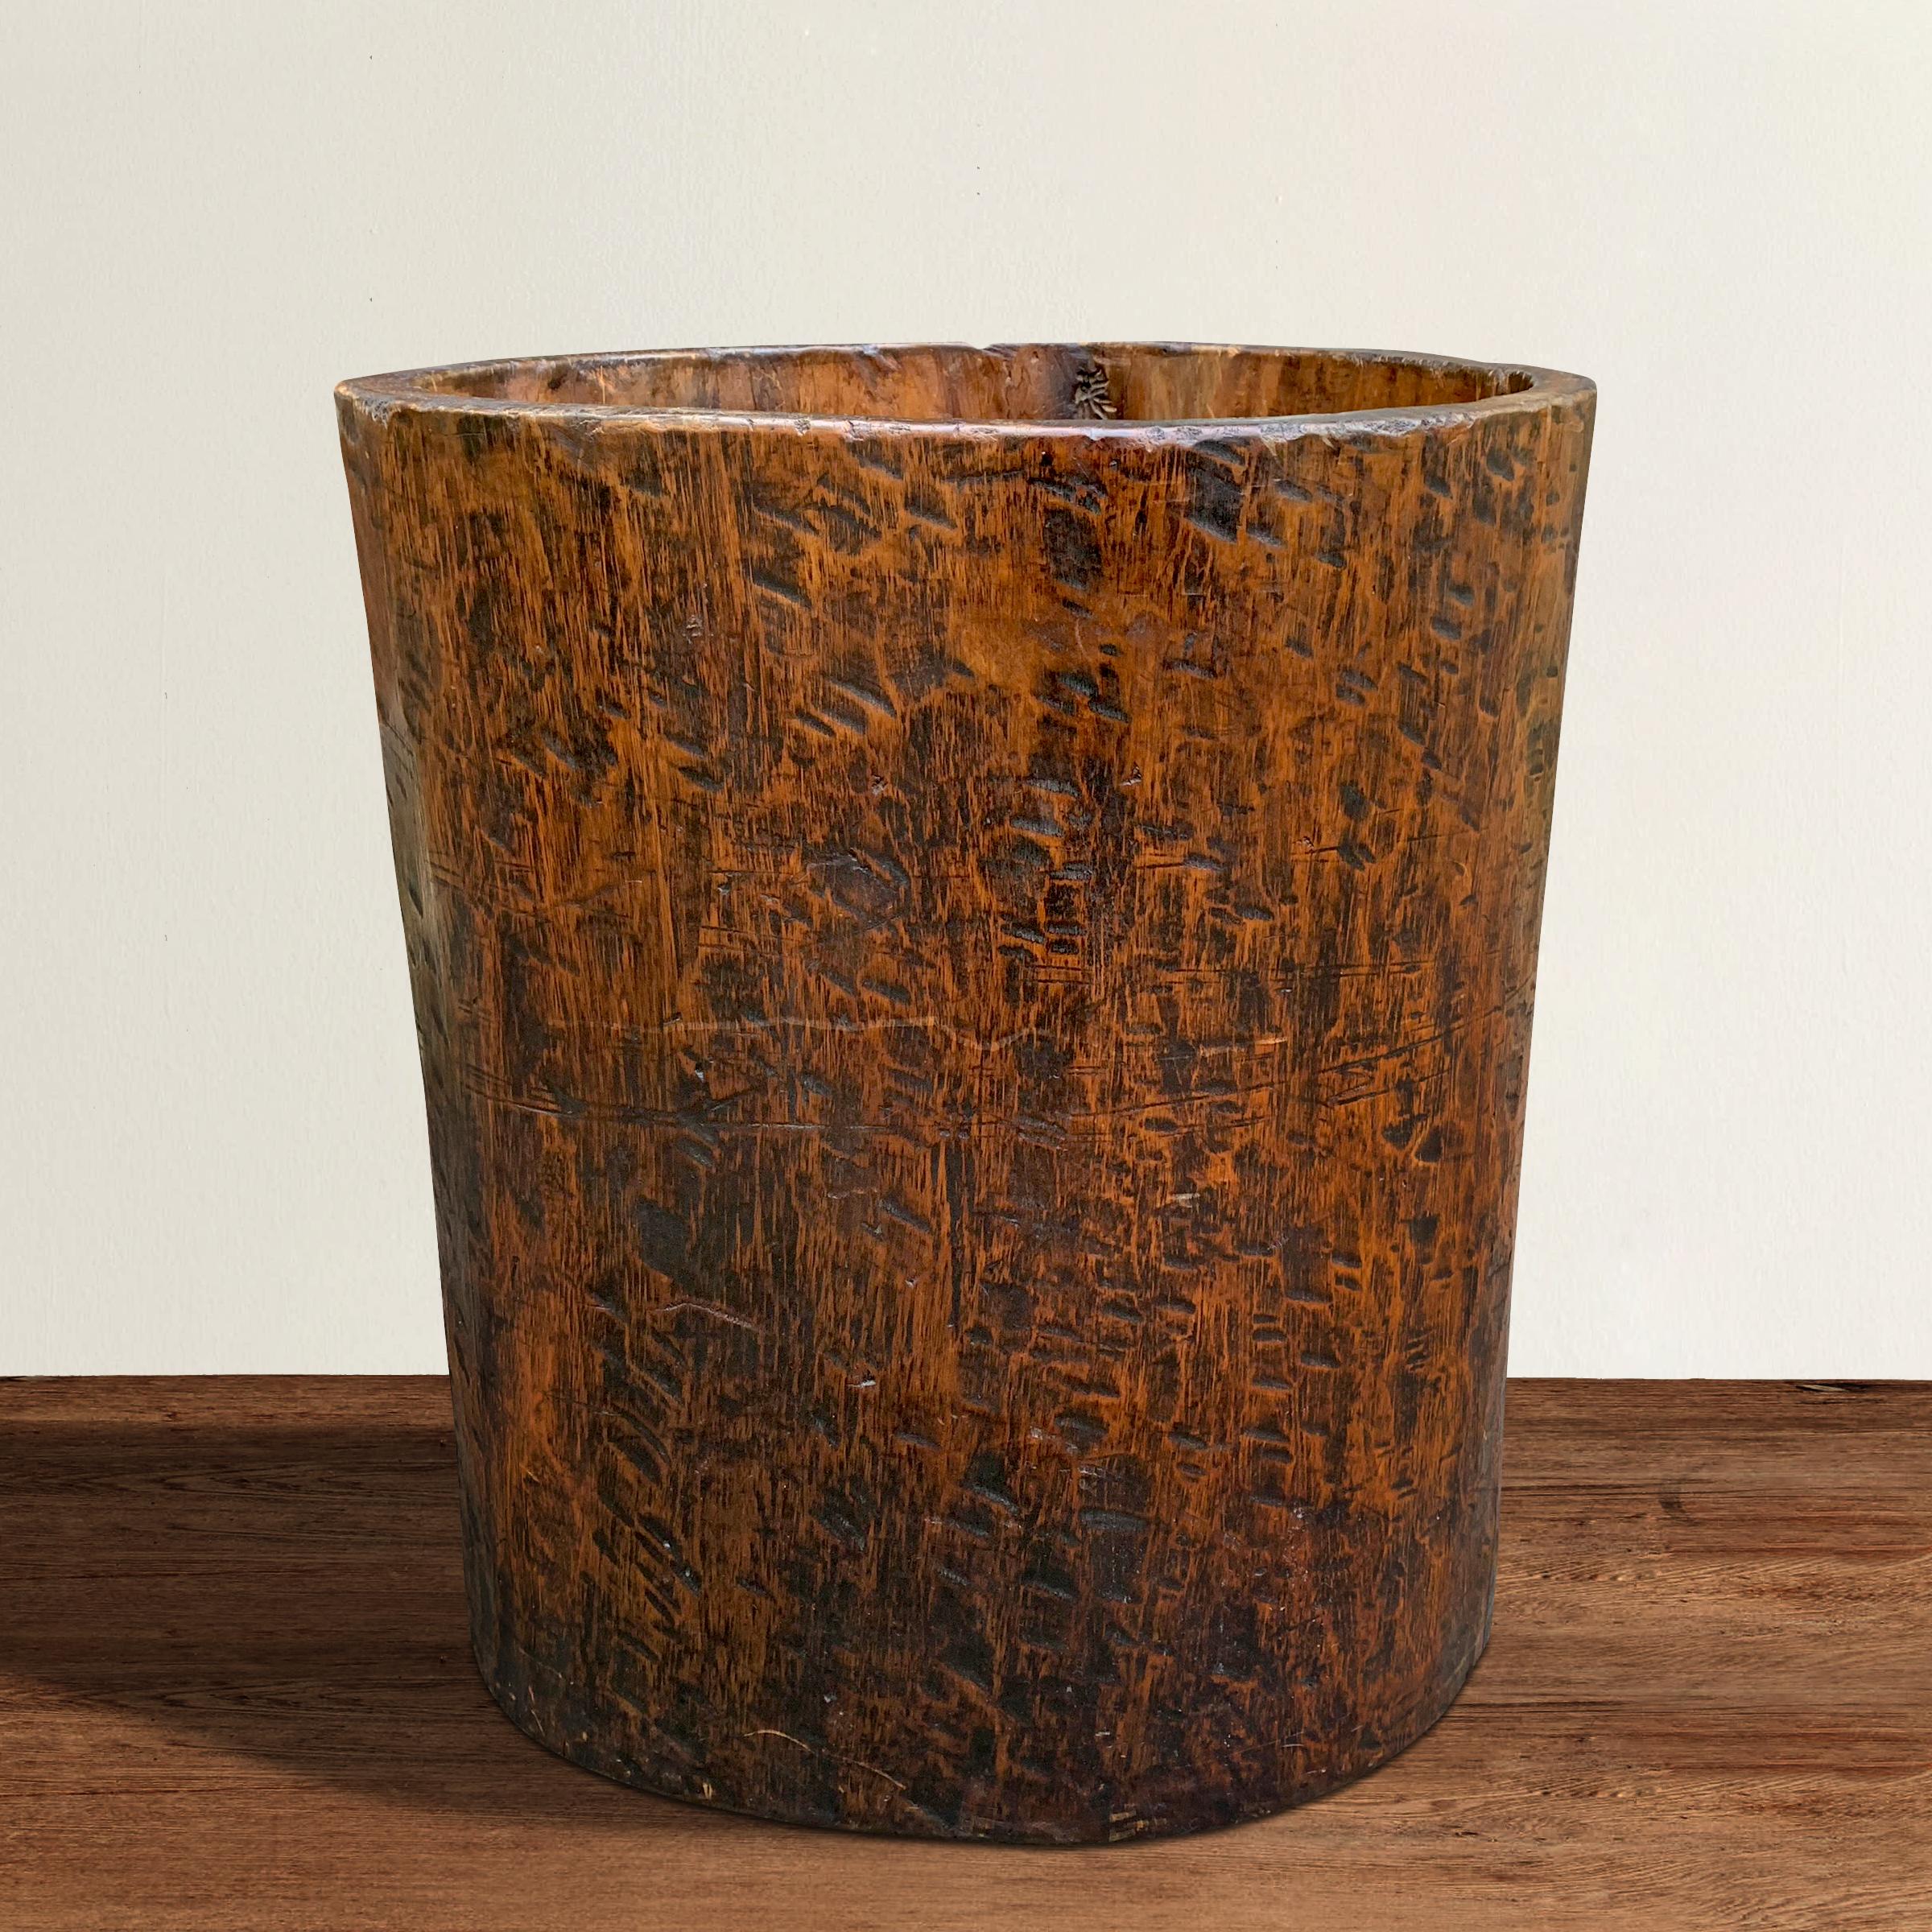 A fantastic 19th century grain barrel hand-hewn from a single tree trunk, and retaining traces of its original finish. Barrels like these have been used throughout the Eastern US, Northern and Western Europe, and parts of Asia to protect stored